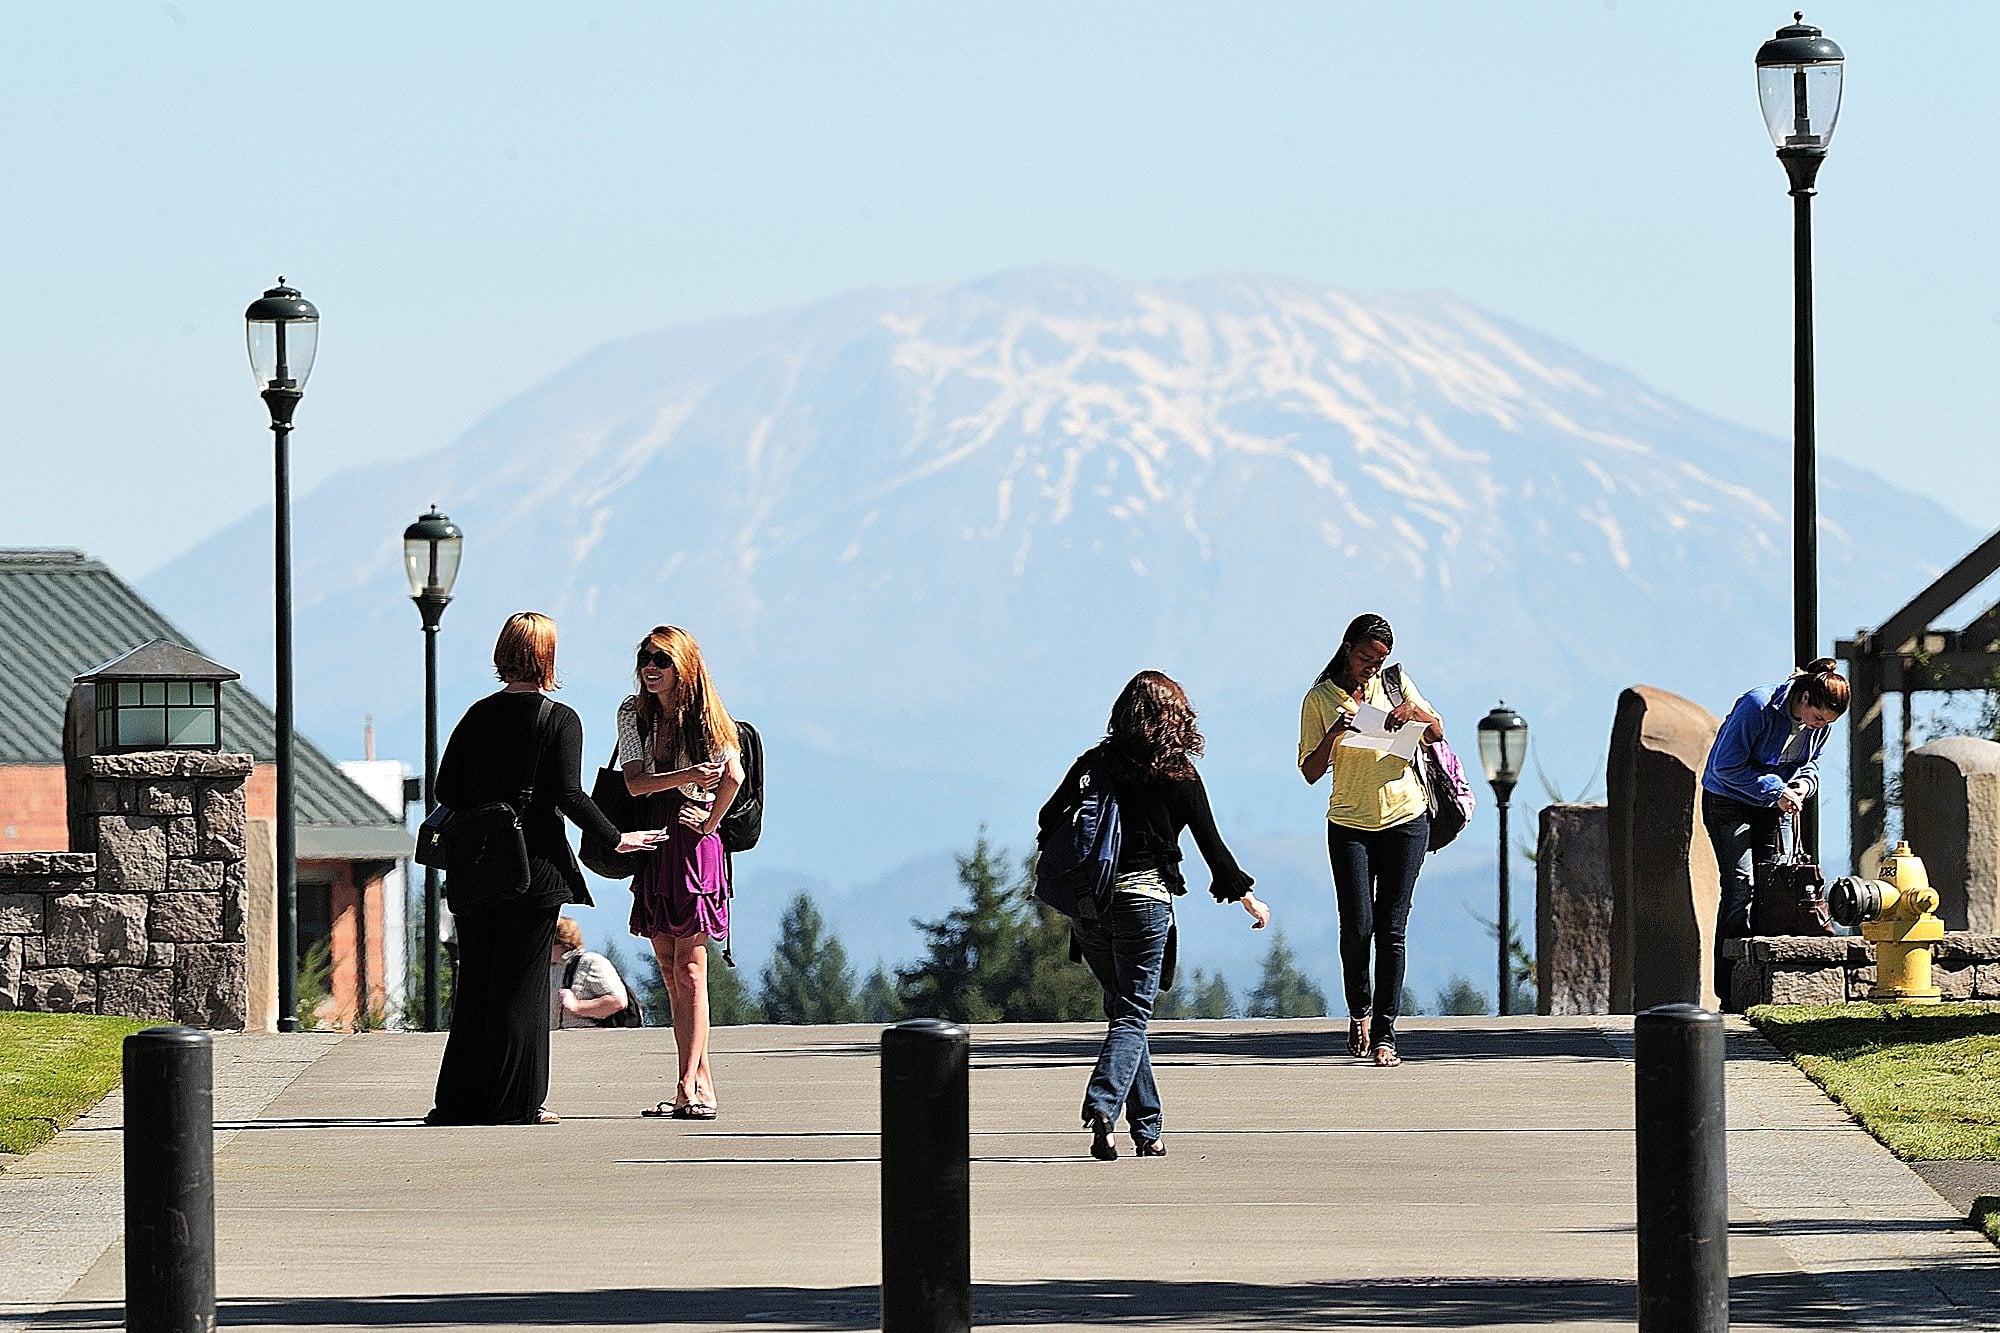 Students make their way on campus at Washington State University Vancouver in this August 2010 file photo.